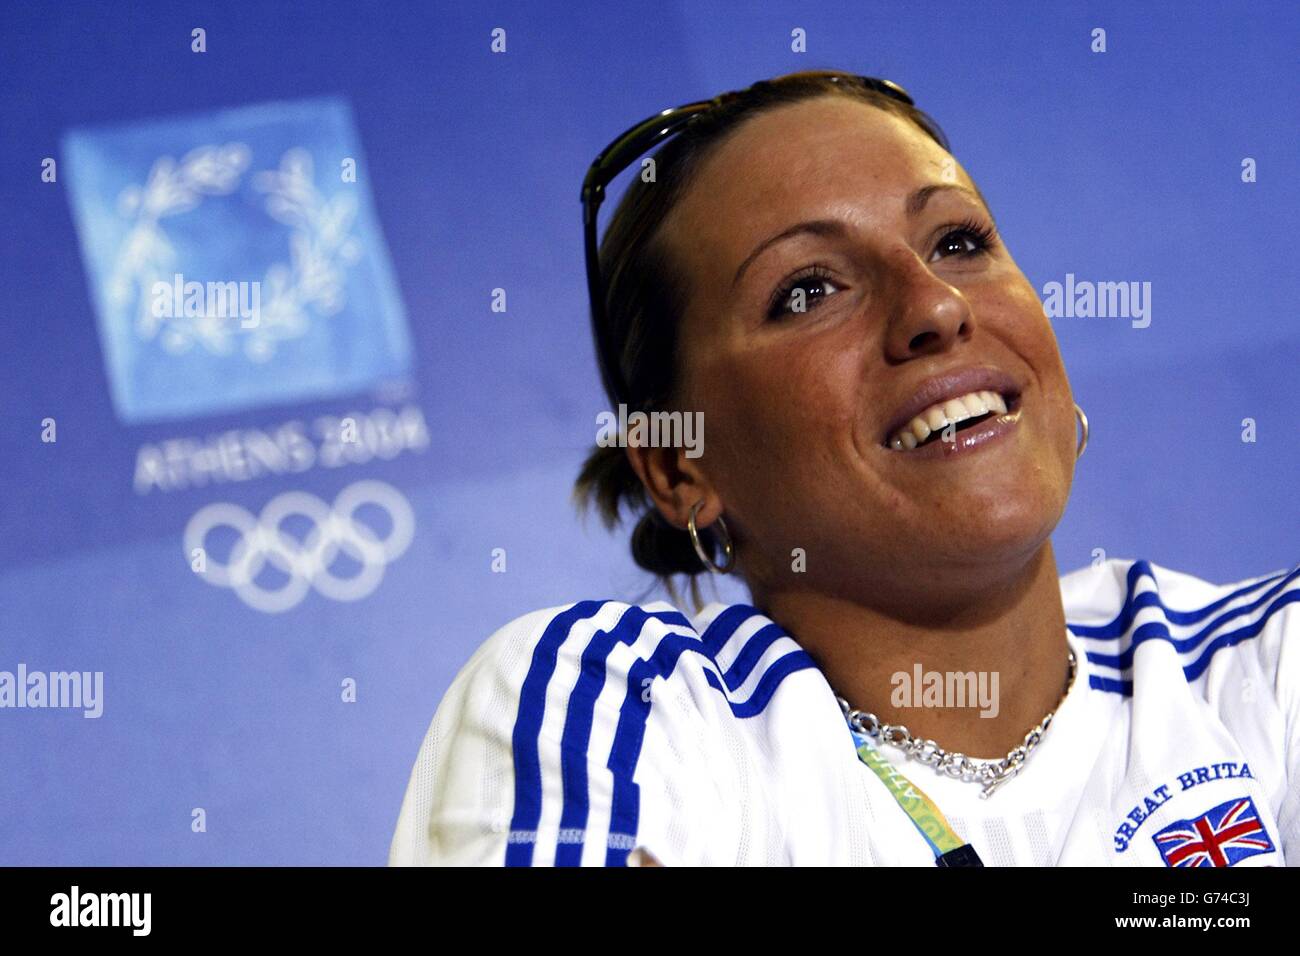 British swimmer Sarah Price from Loughborough at the Olympic Aquatic Centre in Athens, Greece. Stock Photo